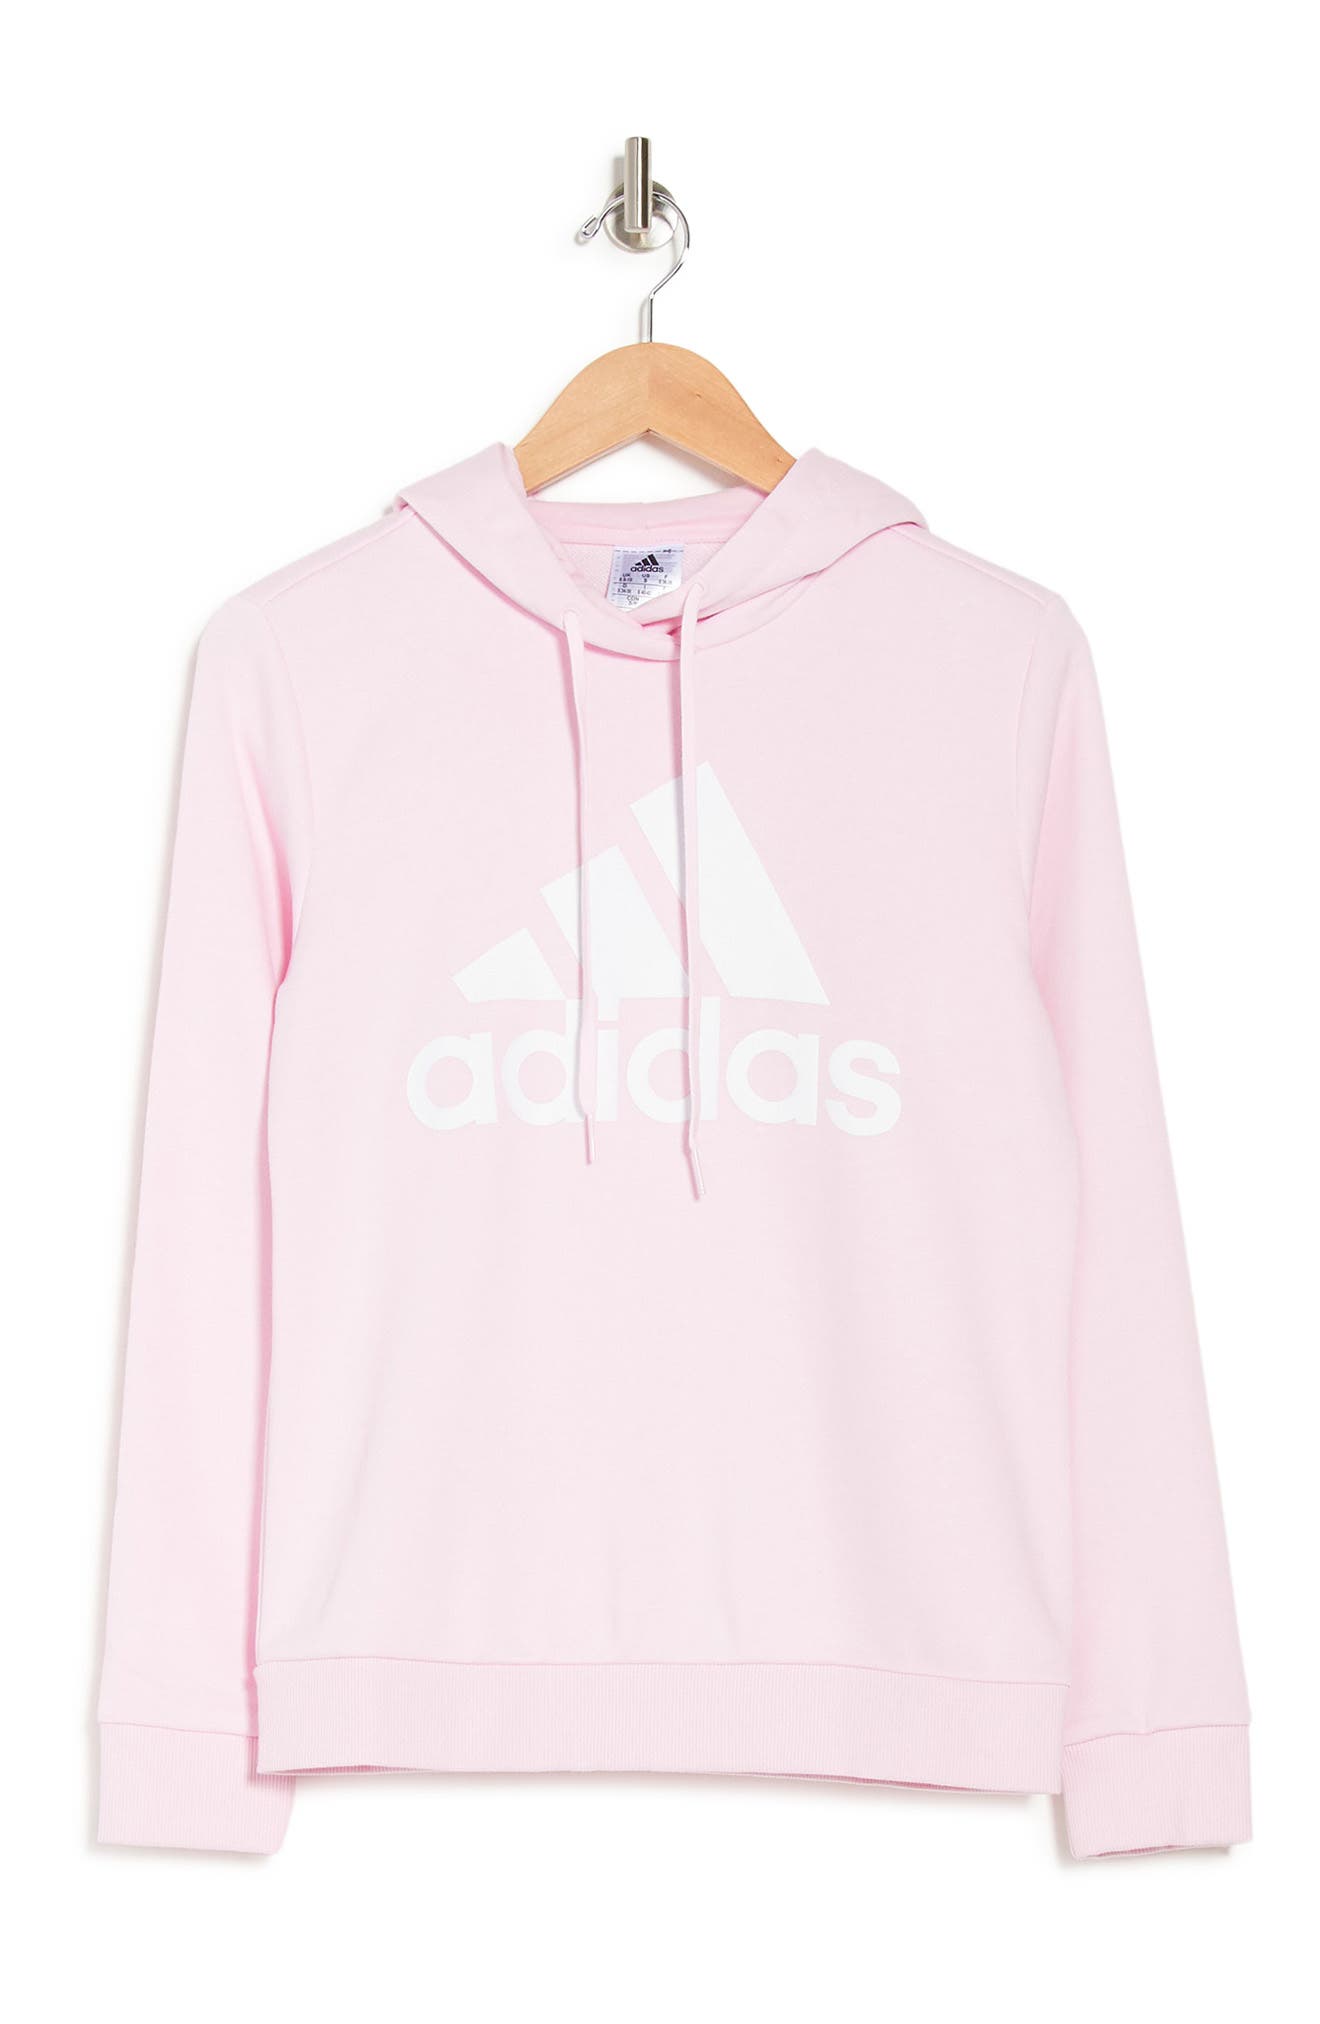 Adidas Originals Logo Graphic Pullover Hoodie In Clpink/whi